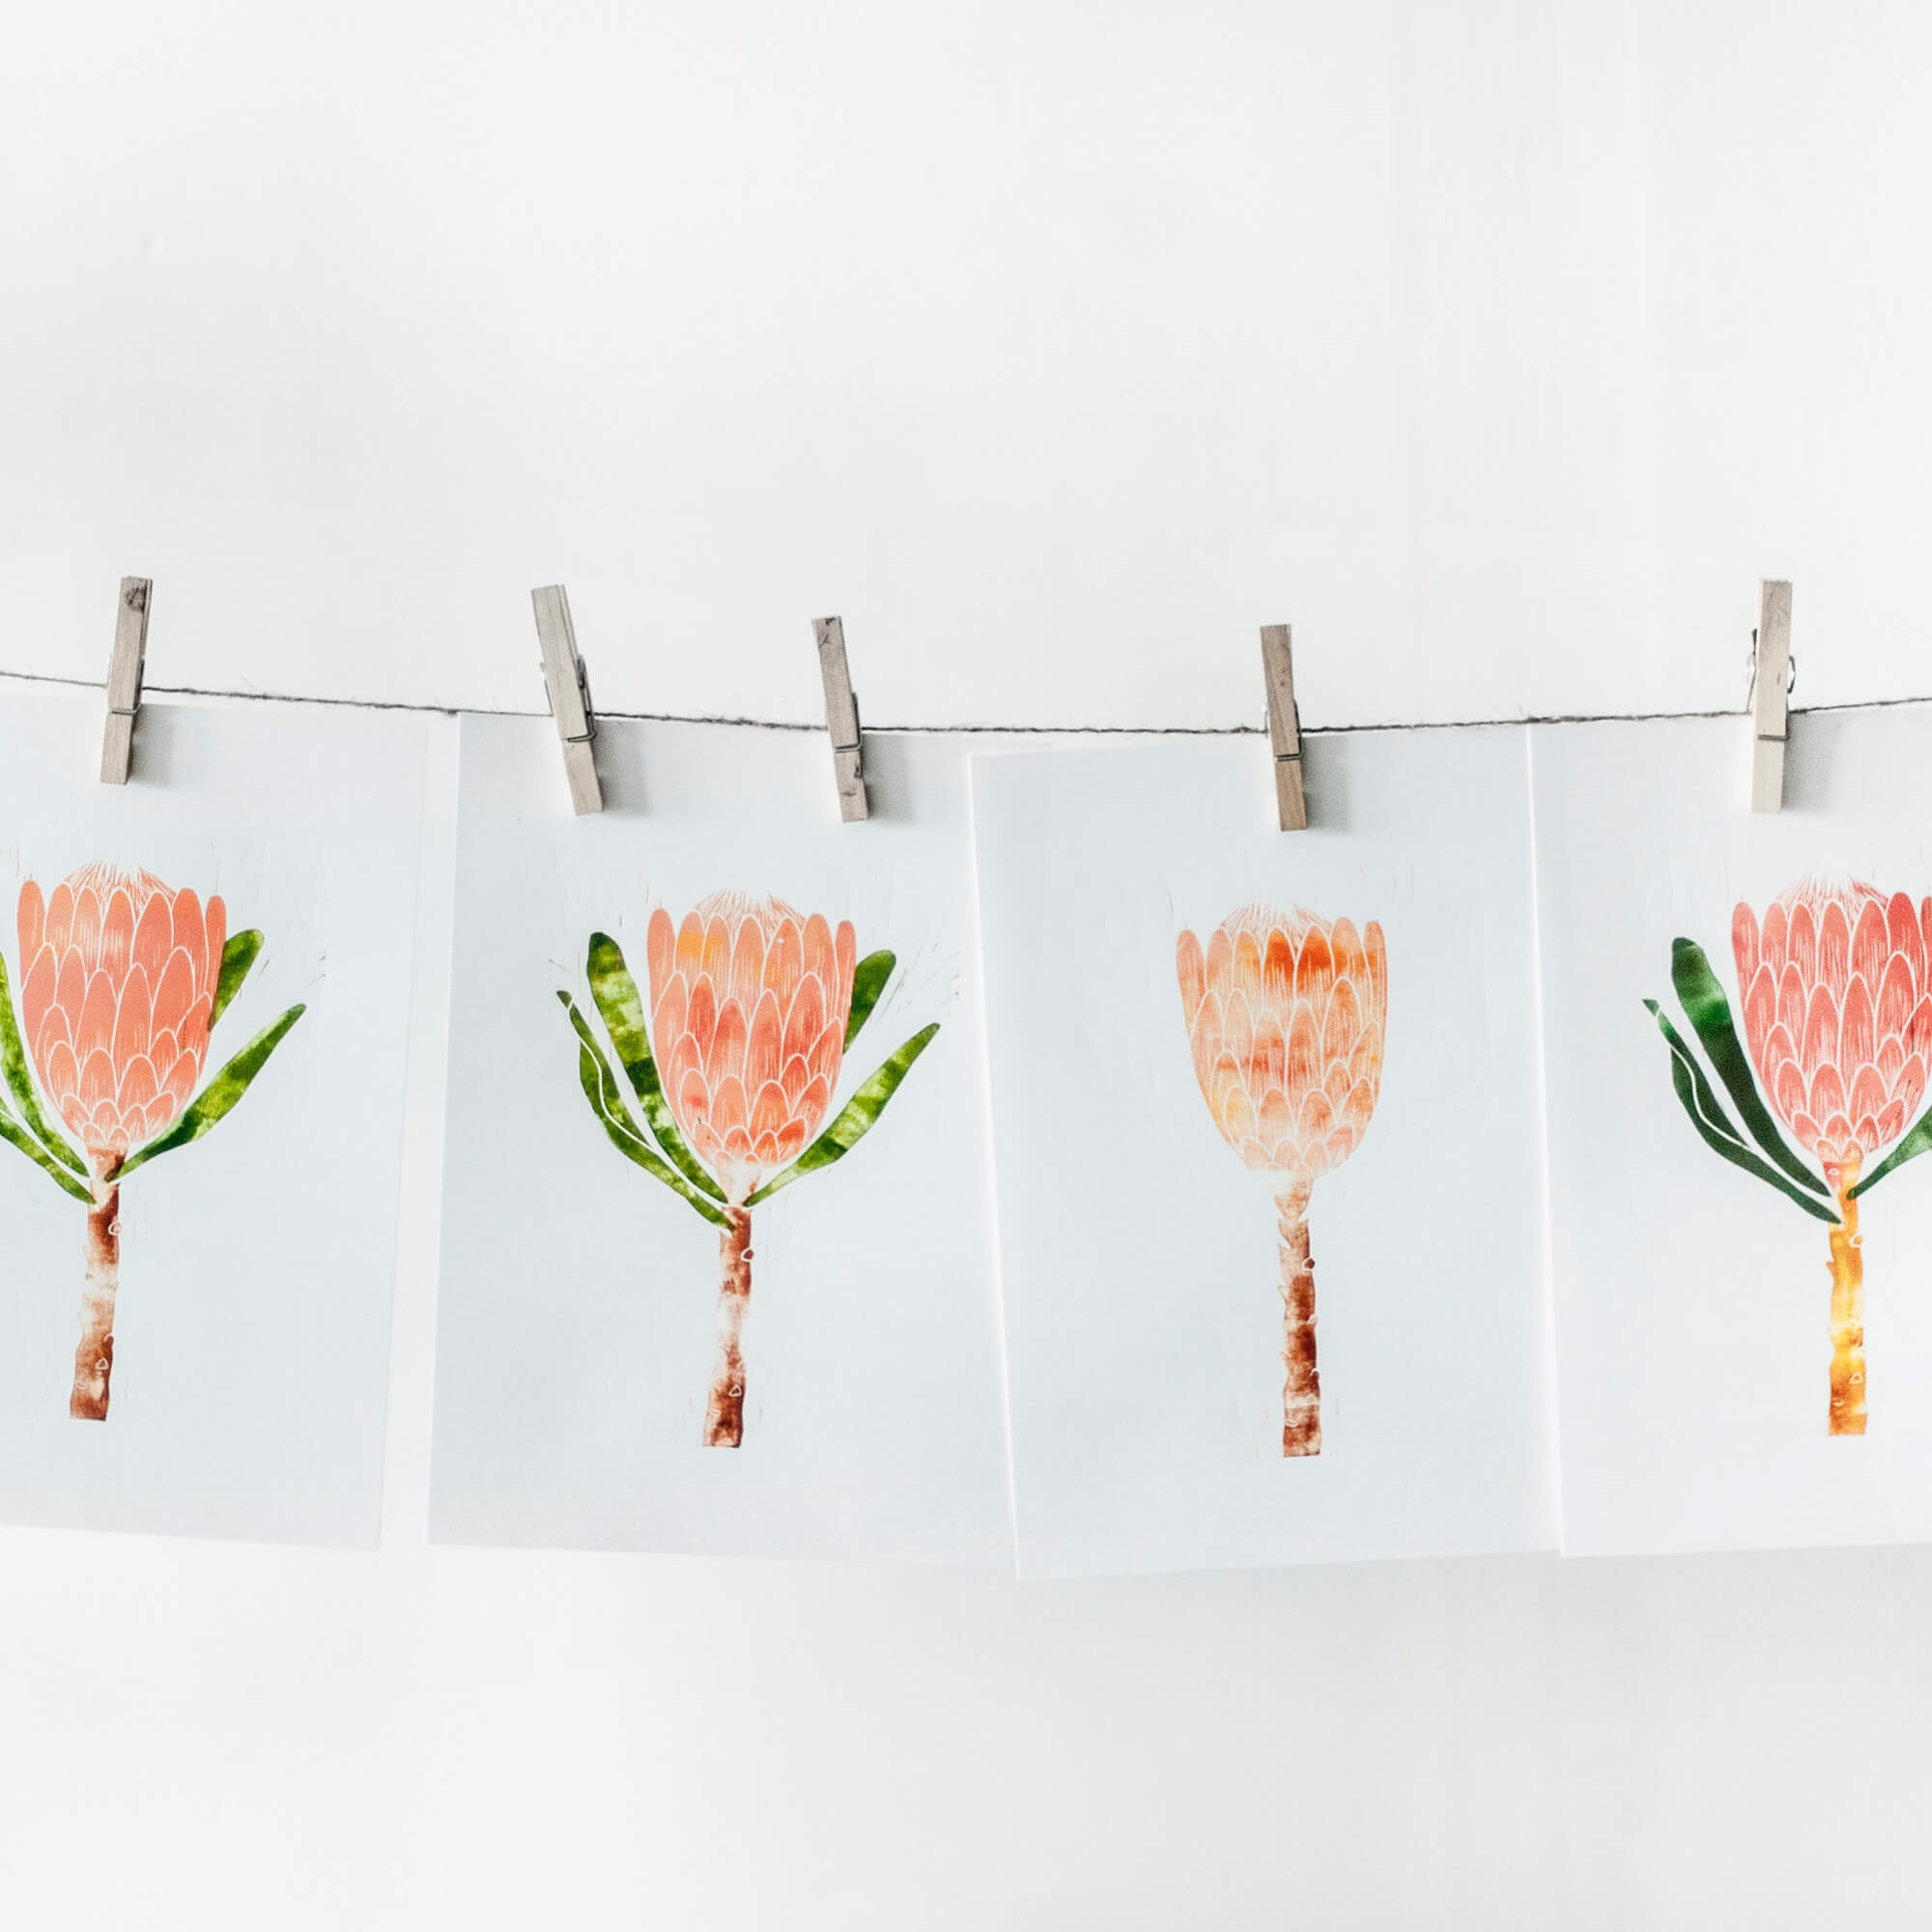 photos on a string with clothespins